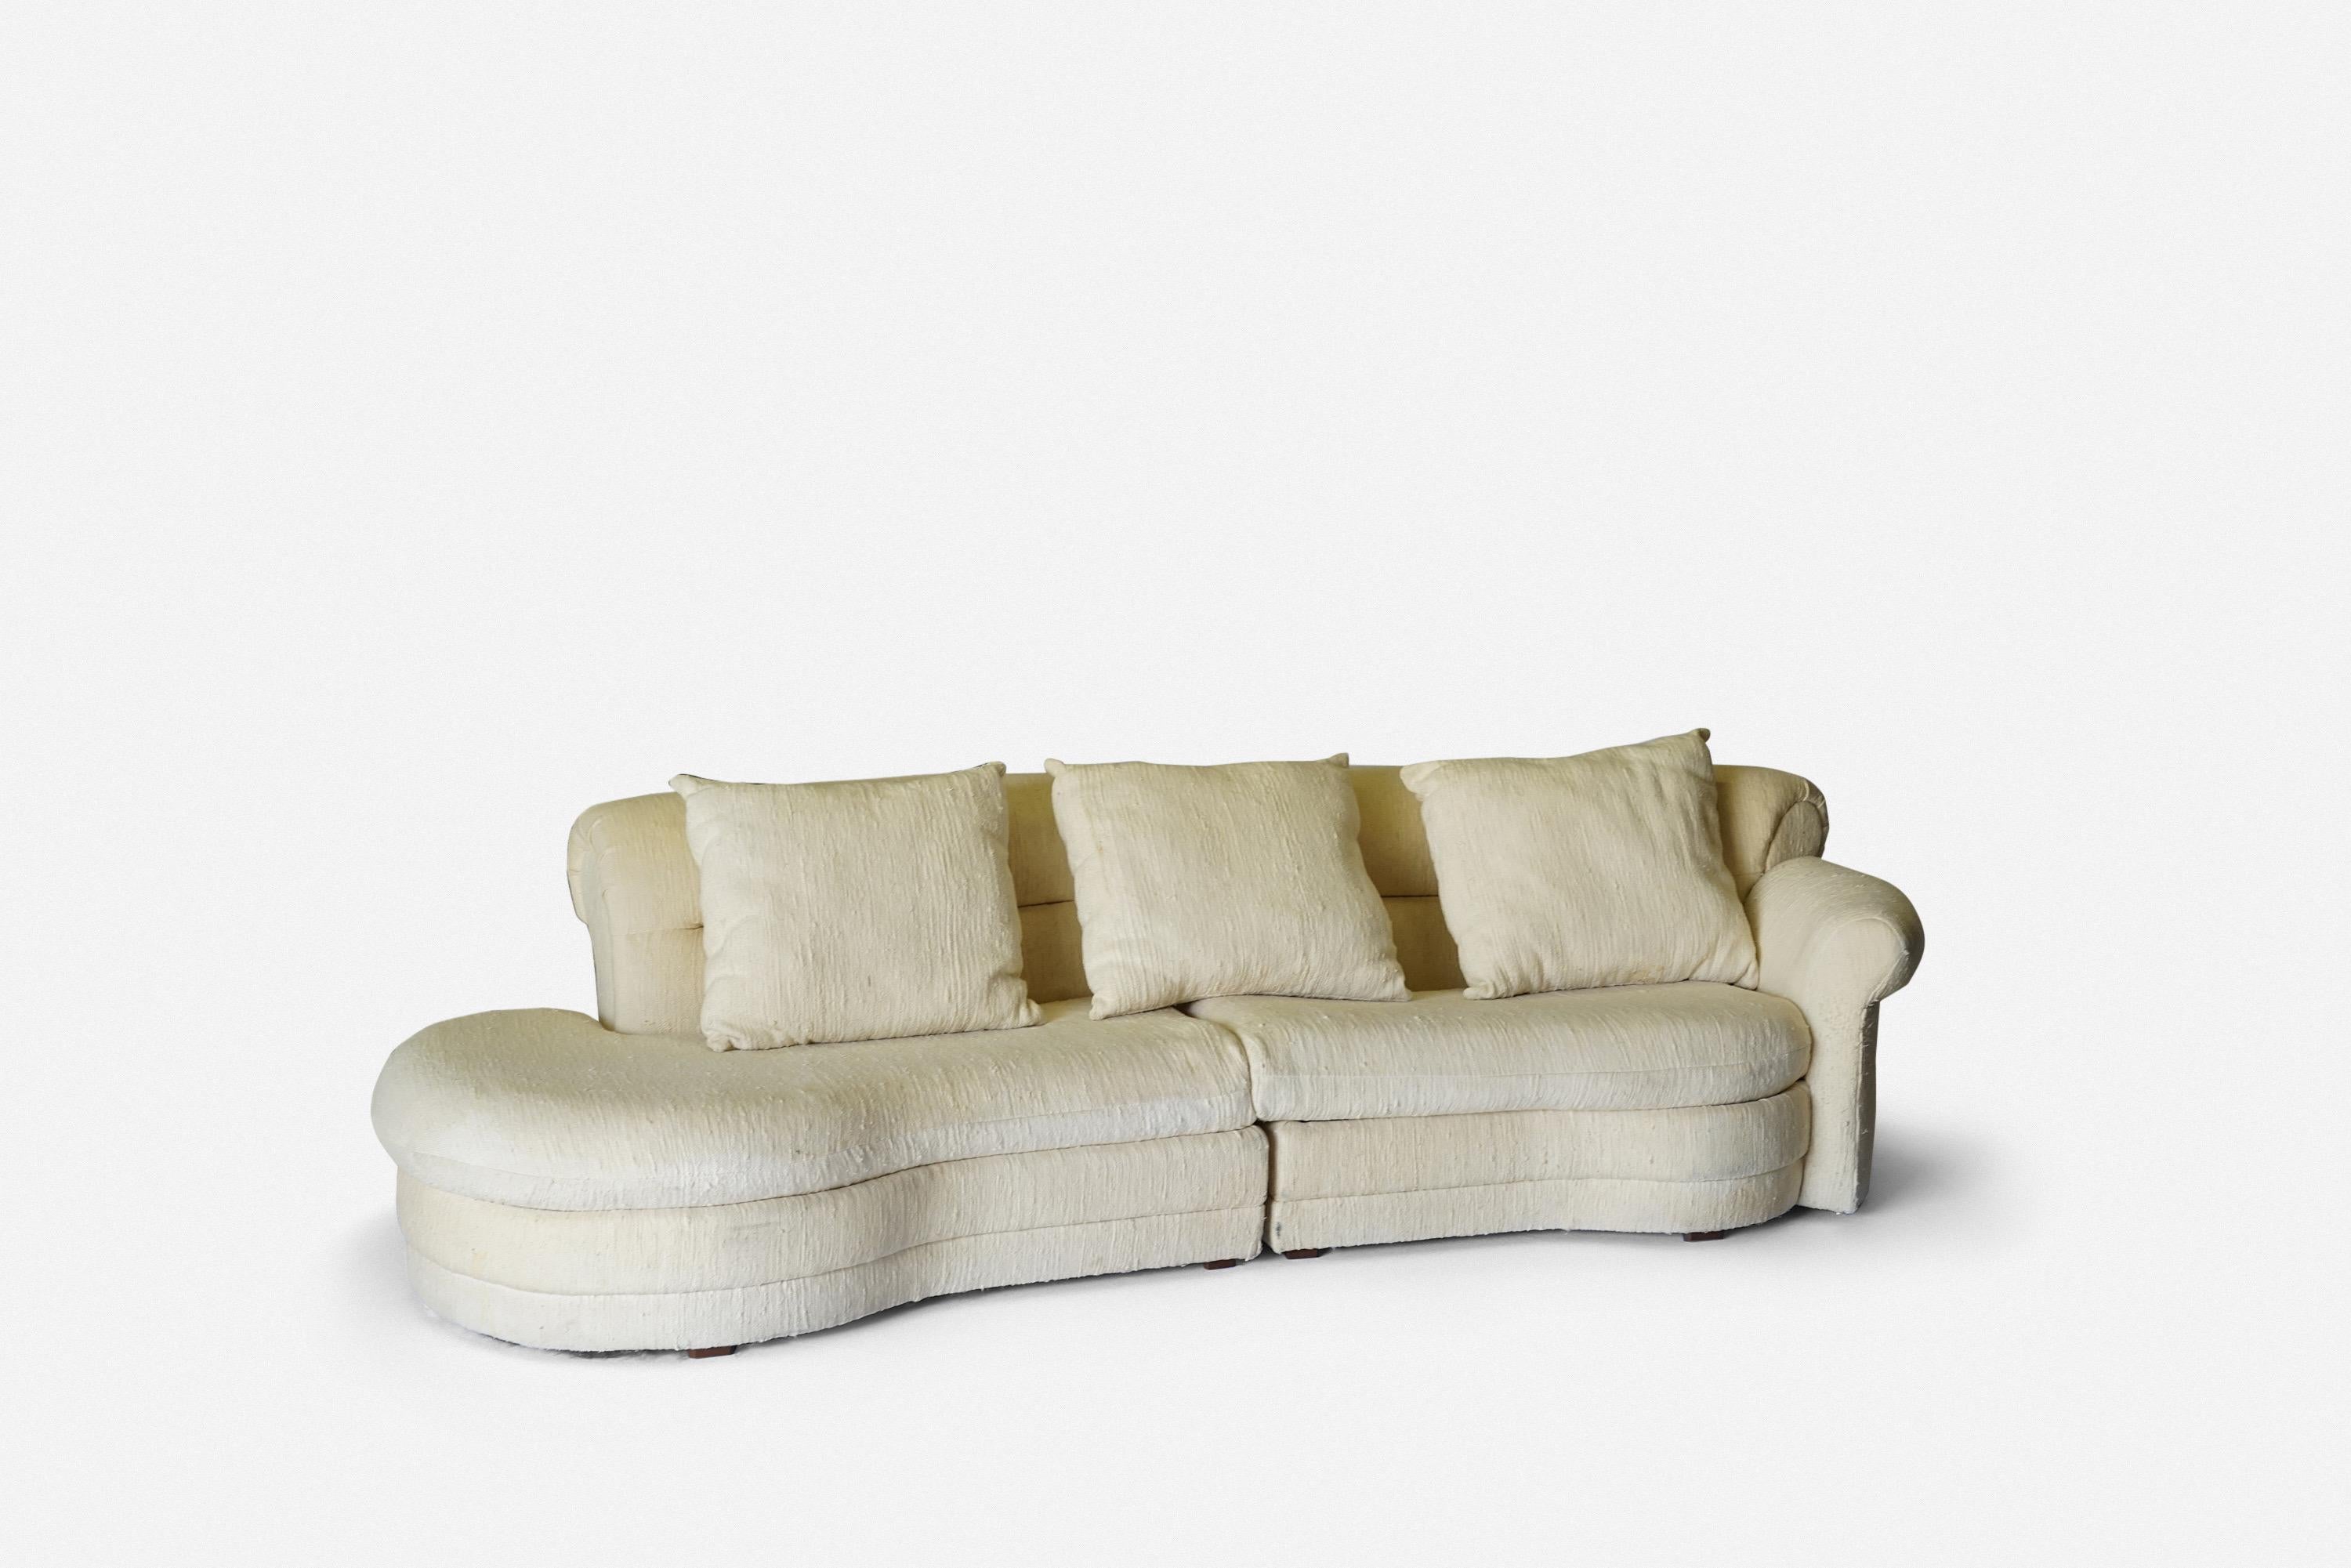 Late 20th Century Sectional Sofa in the Style of Vladimir Kagan For Sale